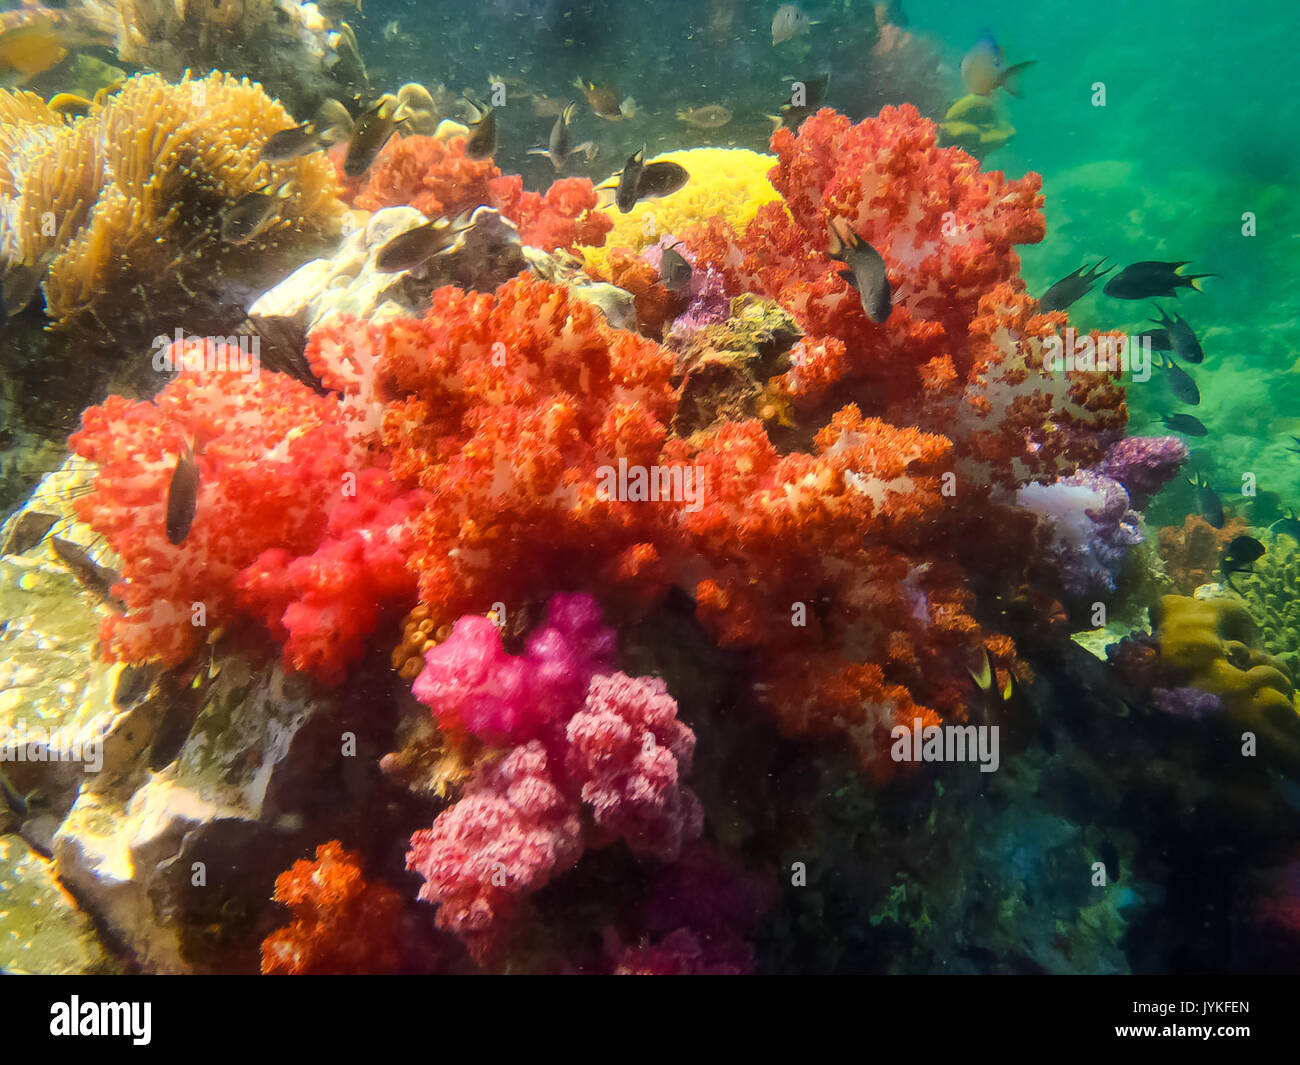 The colorful red coral reef with sea urchin in tropical, underwater. Stock Photo